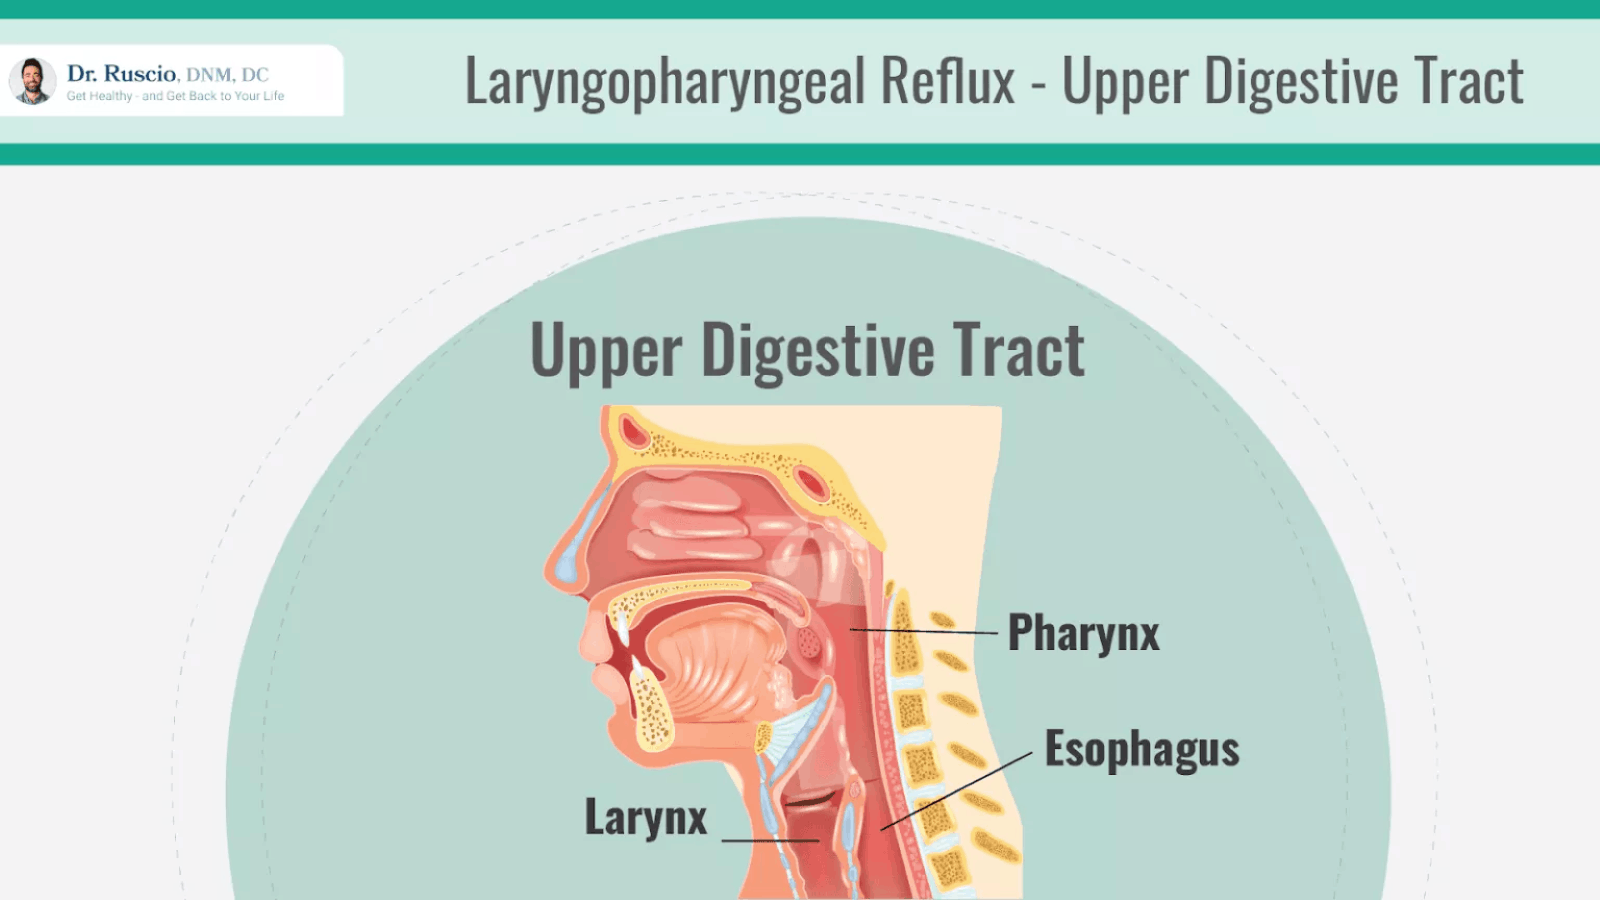 LPR: Illustration of the upper digestive tract